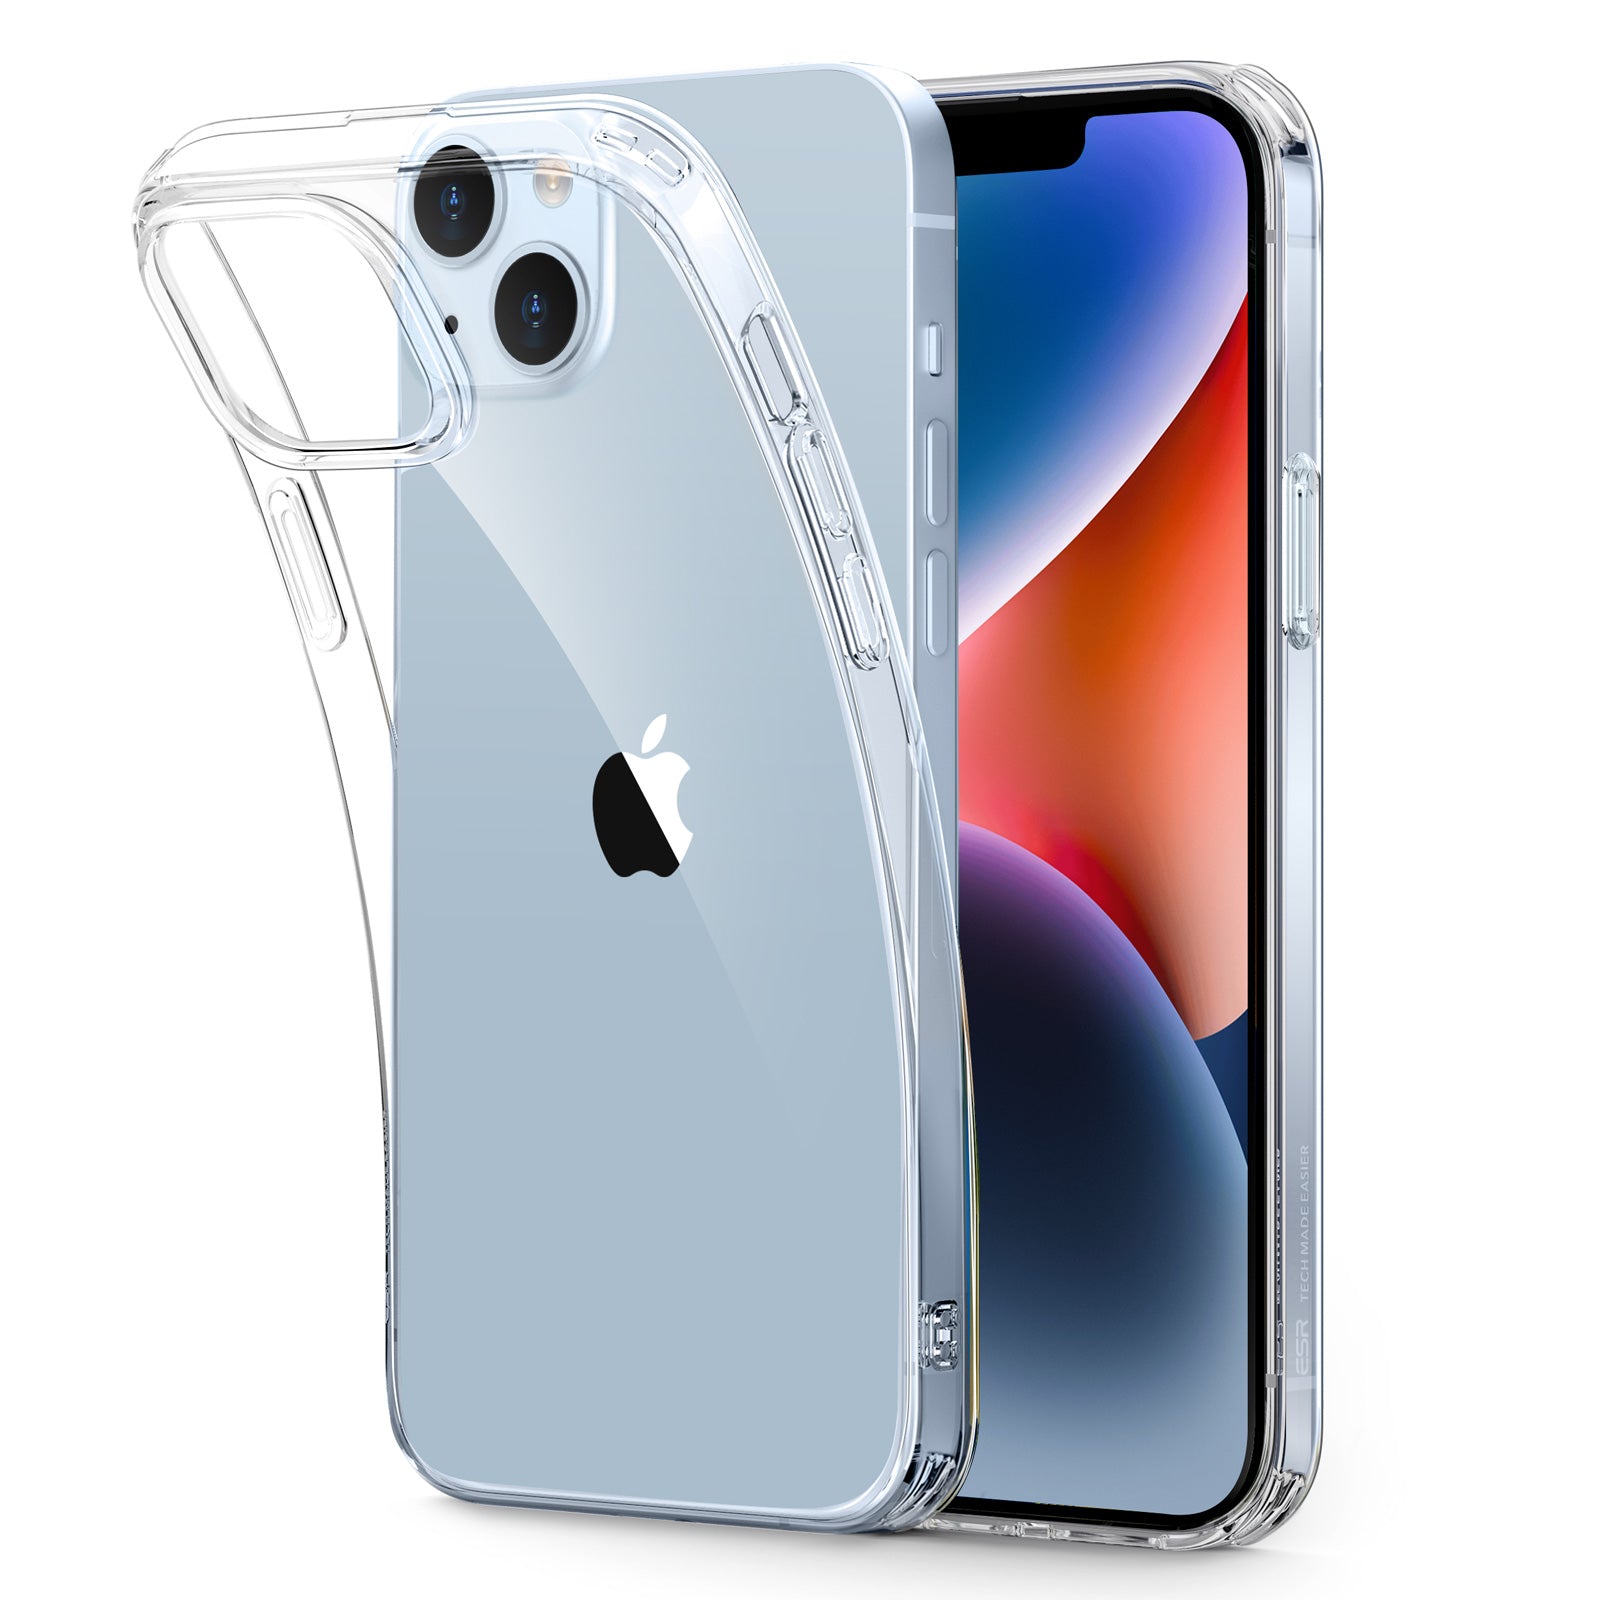 Clear Silicone Case For iPhone